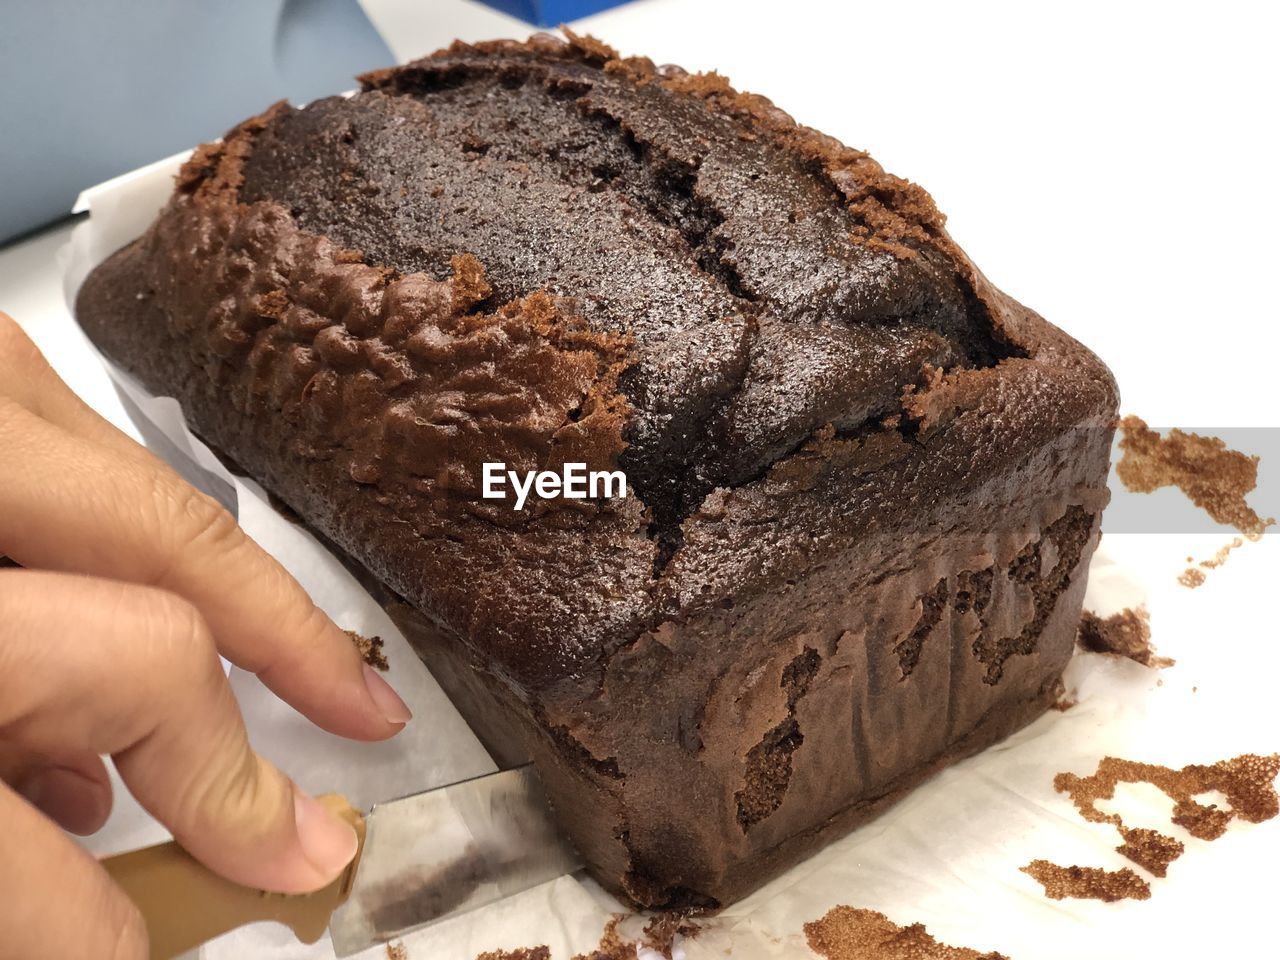 chocolate cake, food, hand, food and drink, one person, dessert, chocolate brownie, baked, sweet food, chocolate, freshness, indoors, cake, sweet, sachertorte, holding, birthday cake, adult, bread, close-up, rye bread, women, temptation, flourless chocolate cake, lifestyles, icing